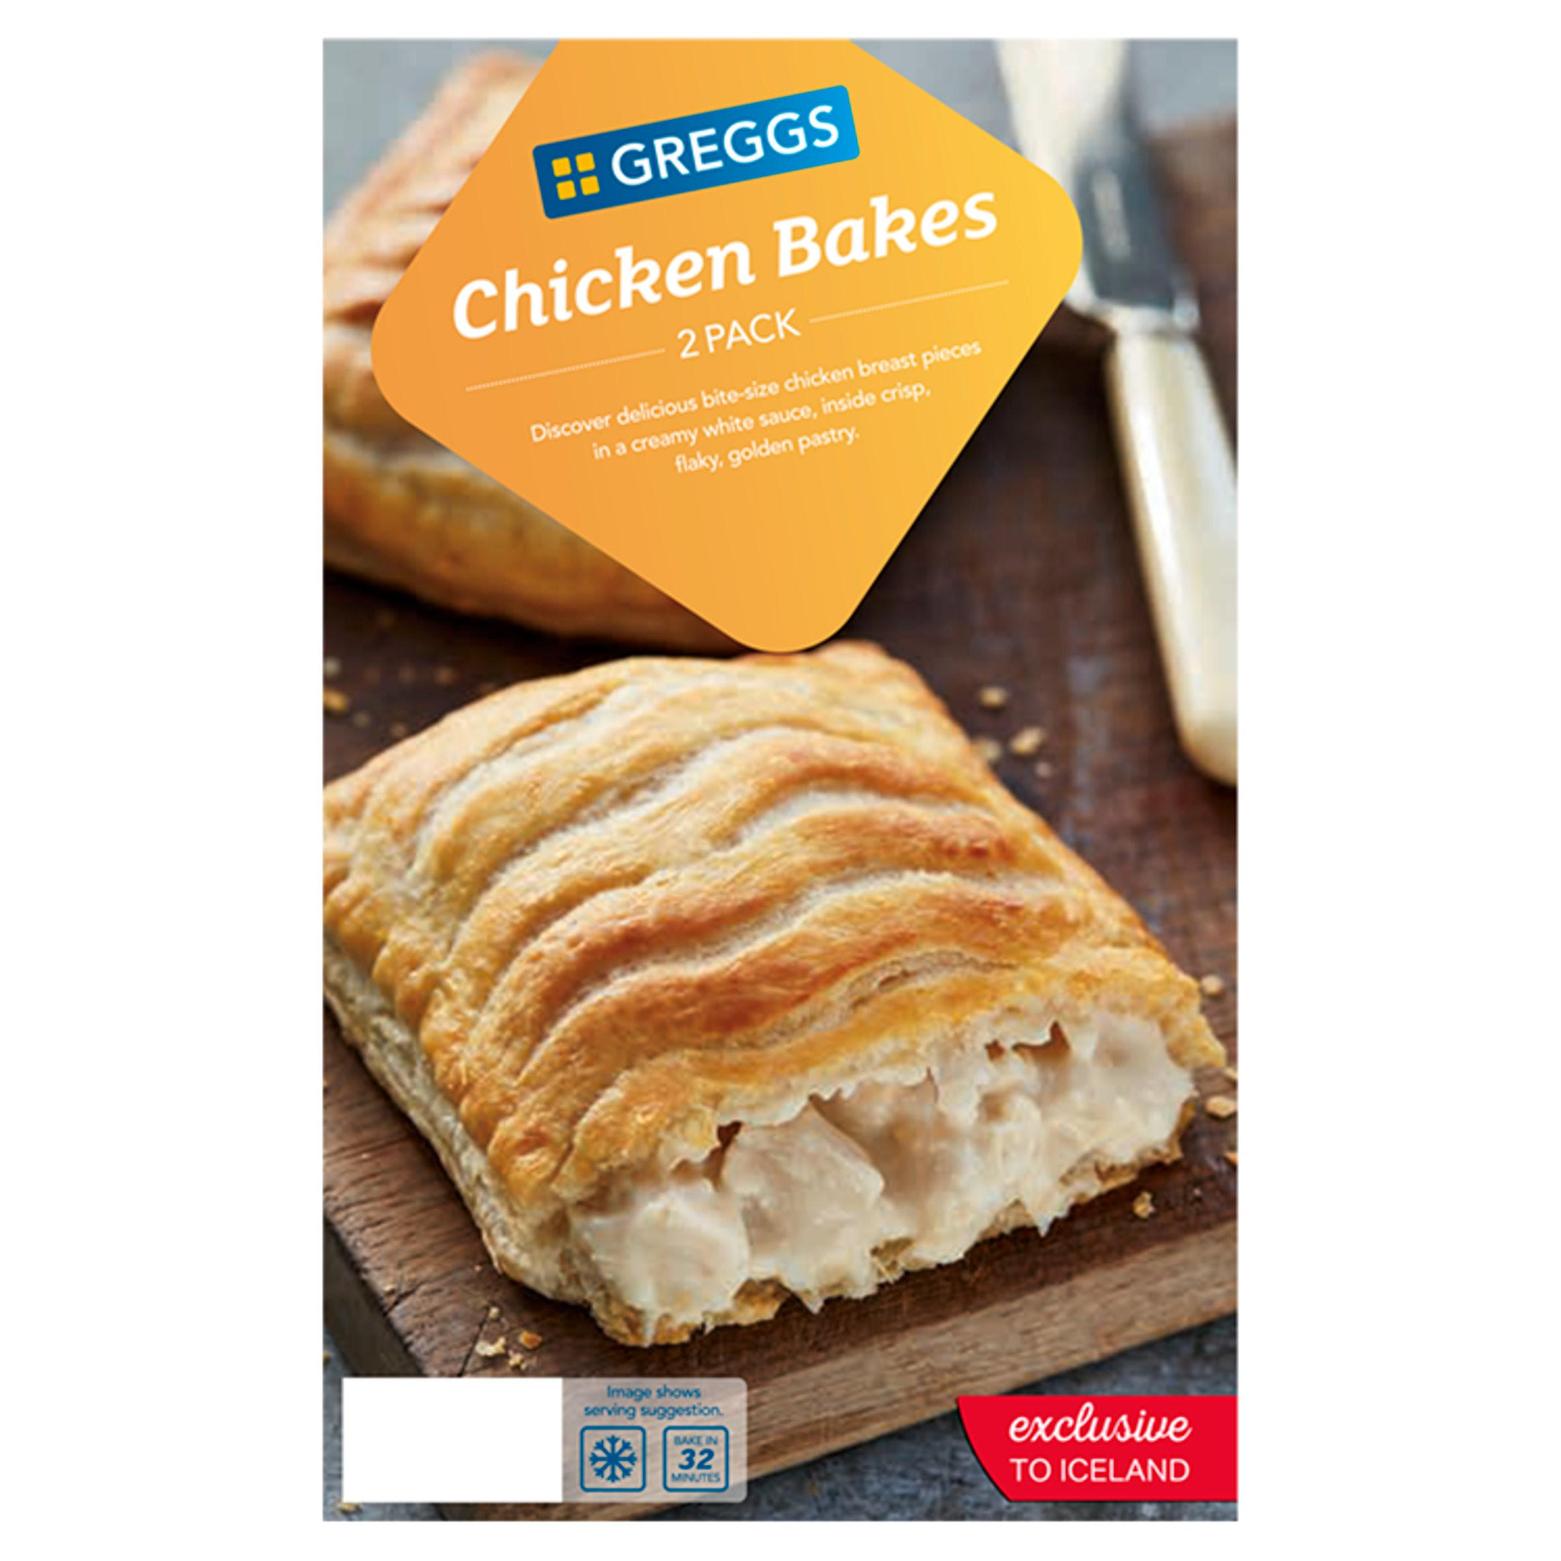 Greggs 2 Chicken Bakes 306g offers at £3 in Iceland